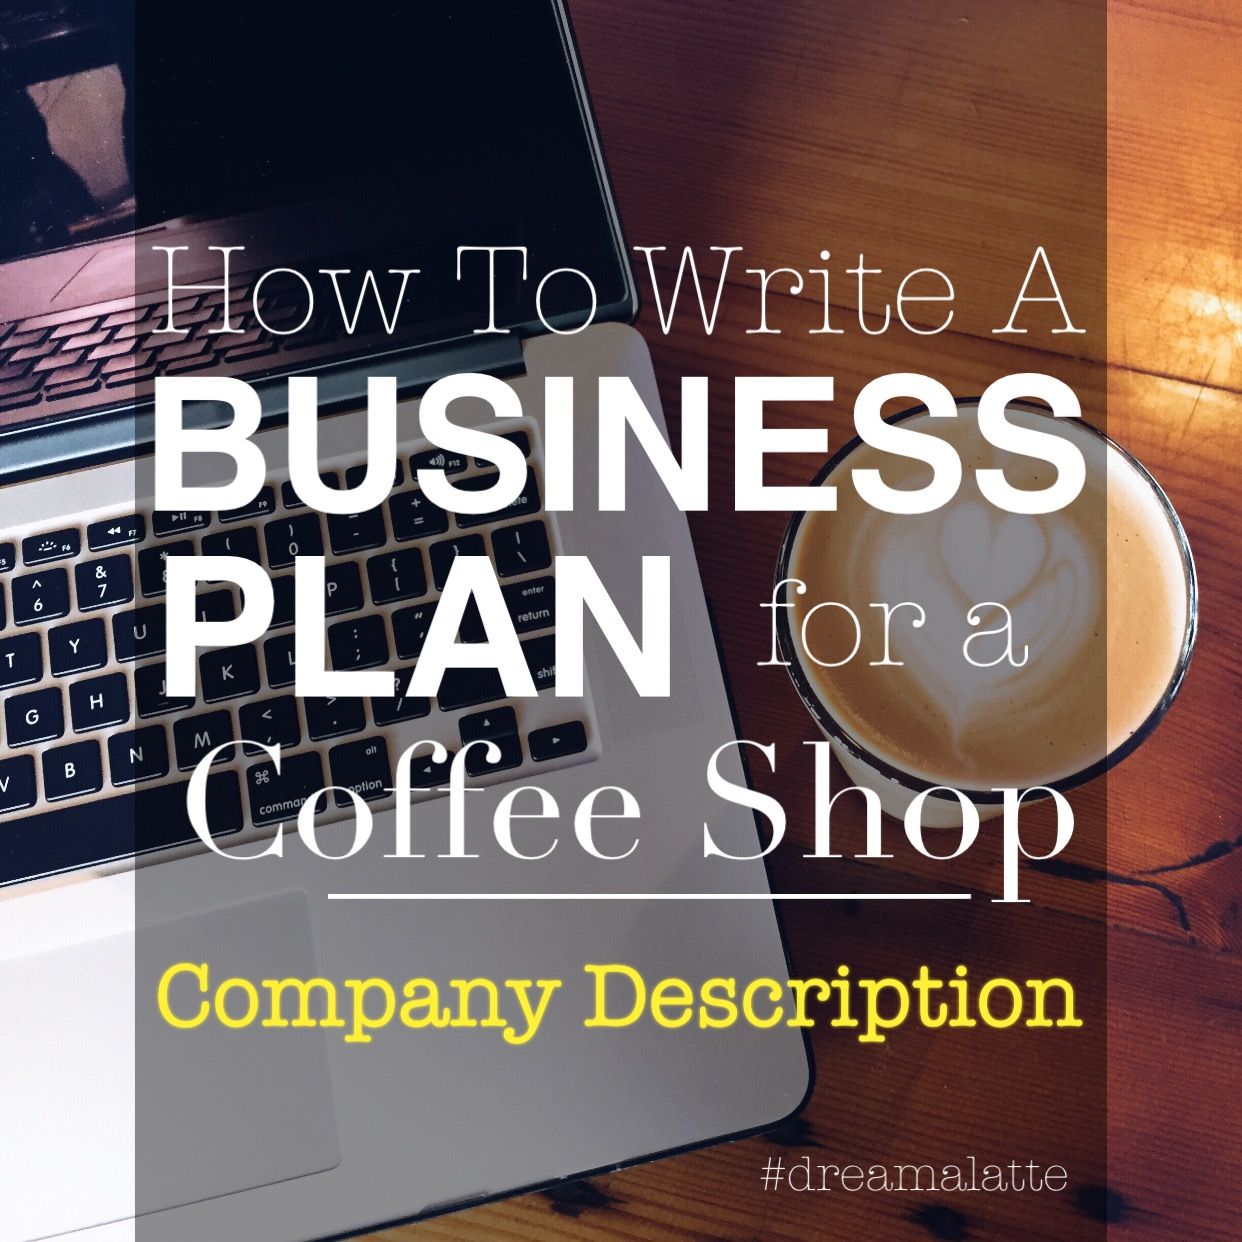 How to Write a Business Plan for Opening a Cafe